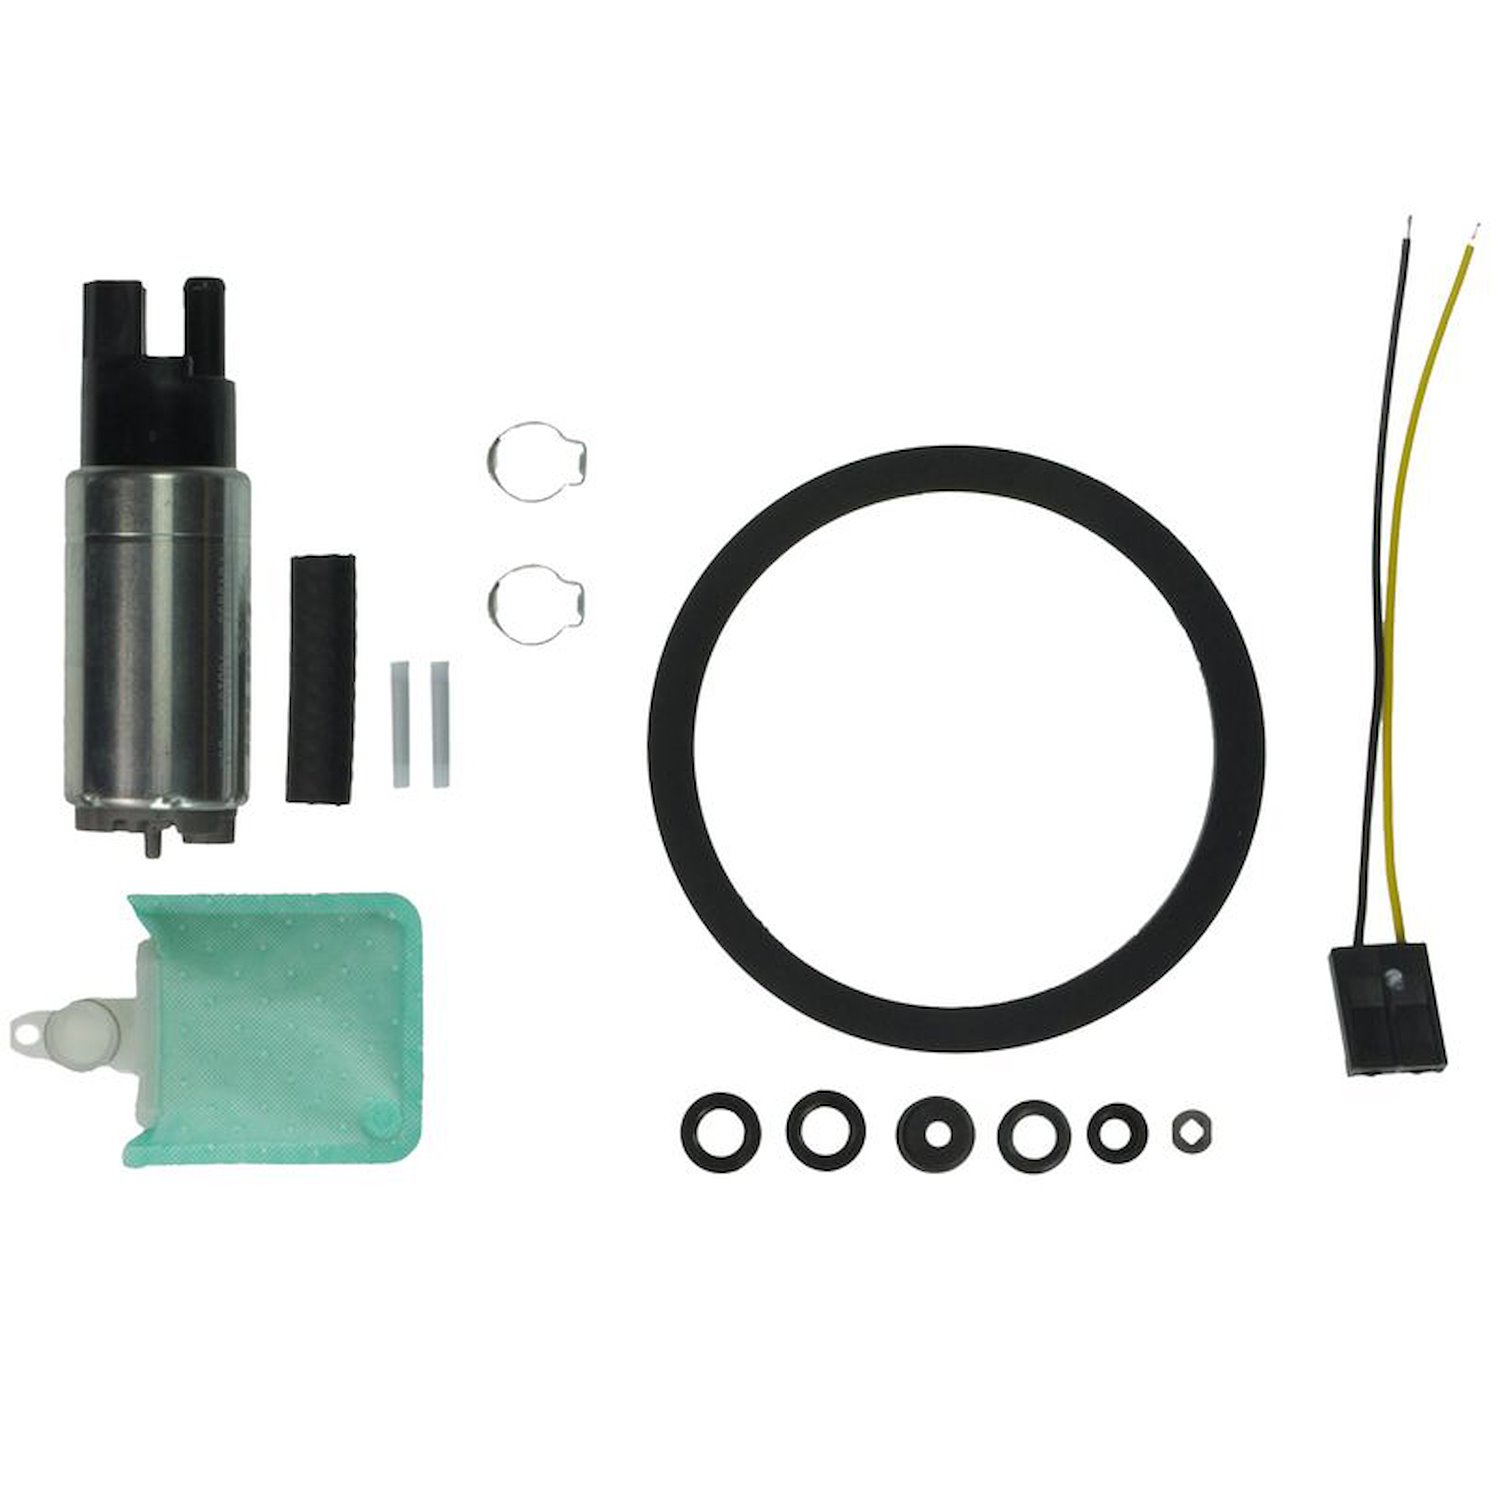 EFI In-Tank Electric Fuel Pump And Strainer Set for 2002-2007 Mitsubishi Lancer